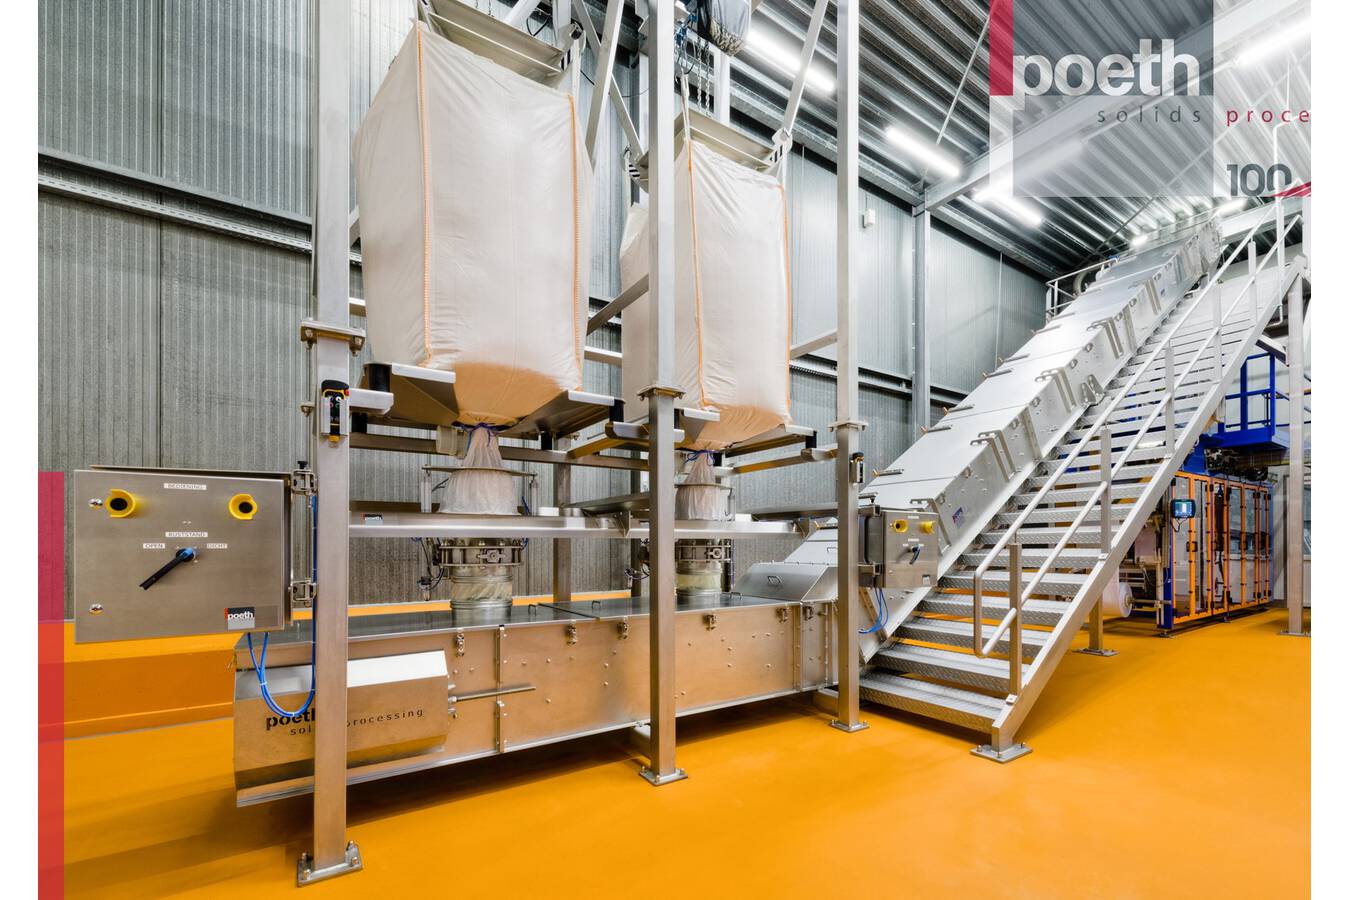 Poeth Z-belt Conveyor very suitable for sensitive products Driessen Food Extrusion is very satisfied with the Poeth Z-belt Conveyor, used for sensitive, abrasive products in the new Food Extrusion filling line.